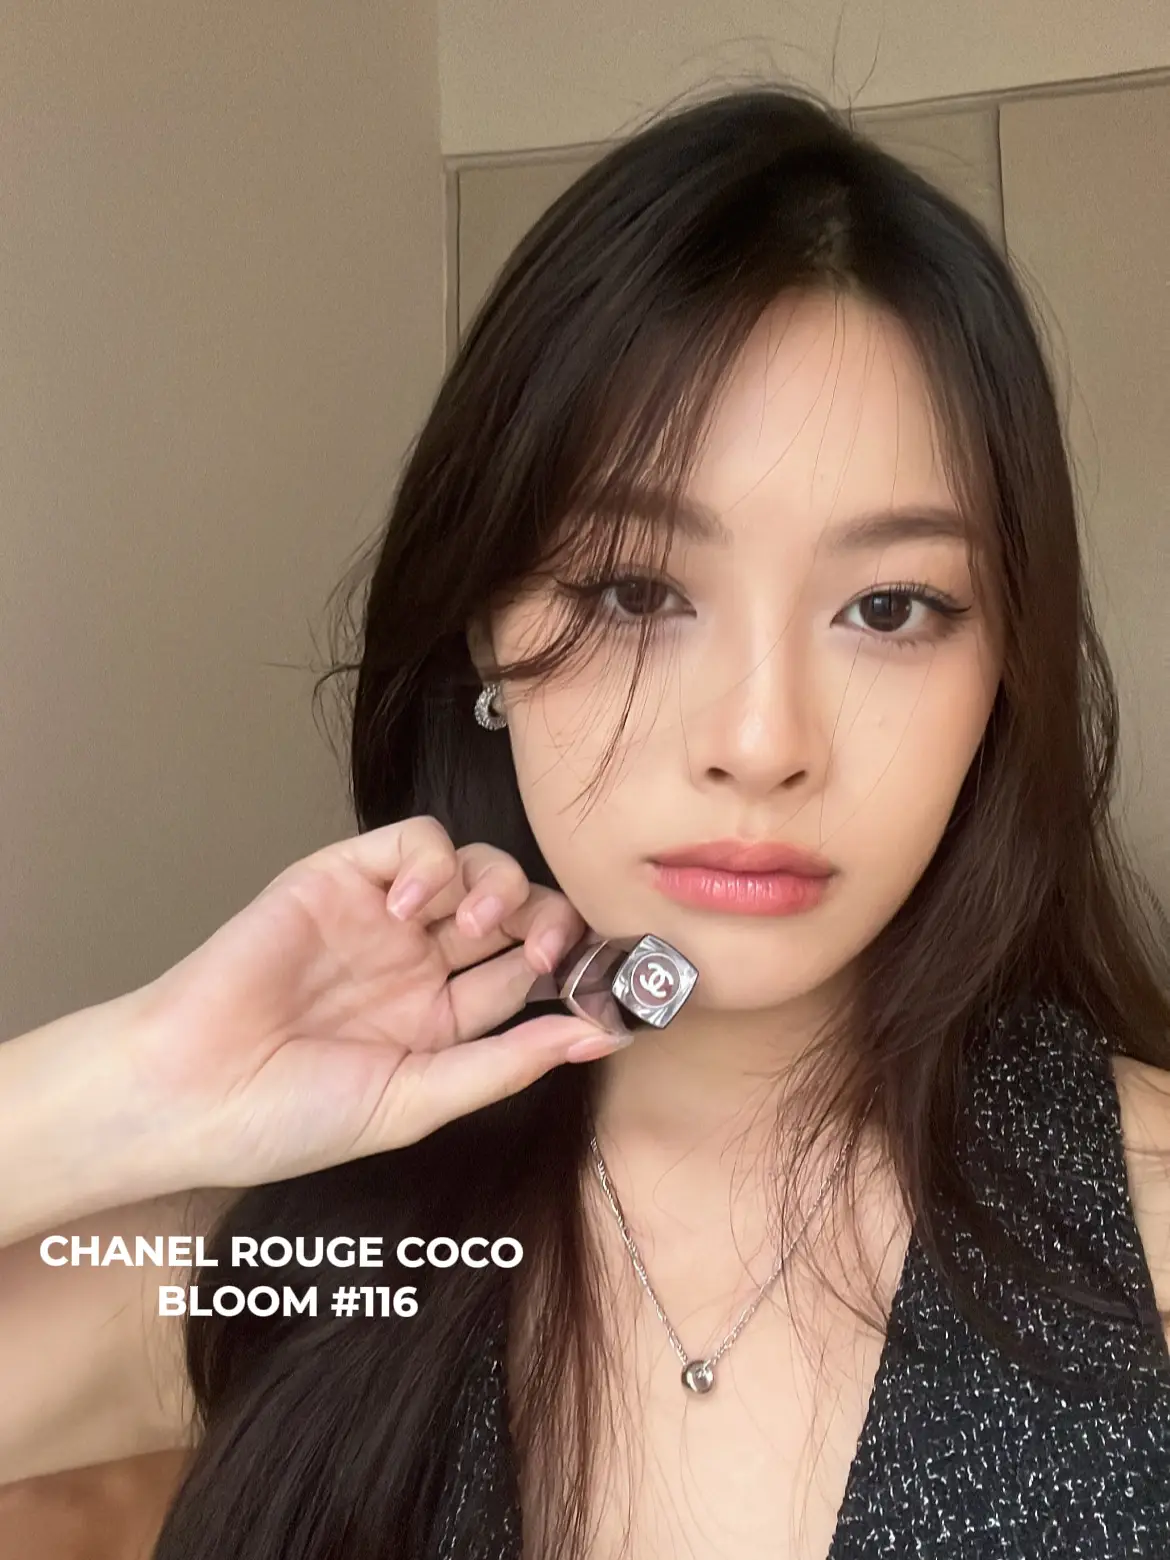 Glow Up! Ft. Chanel Rouge Coco Bloom, Beauty